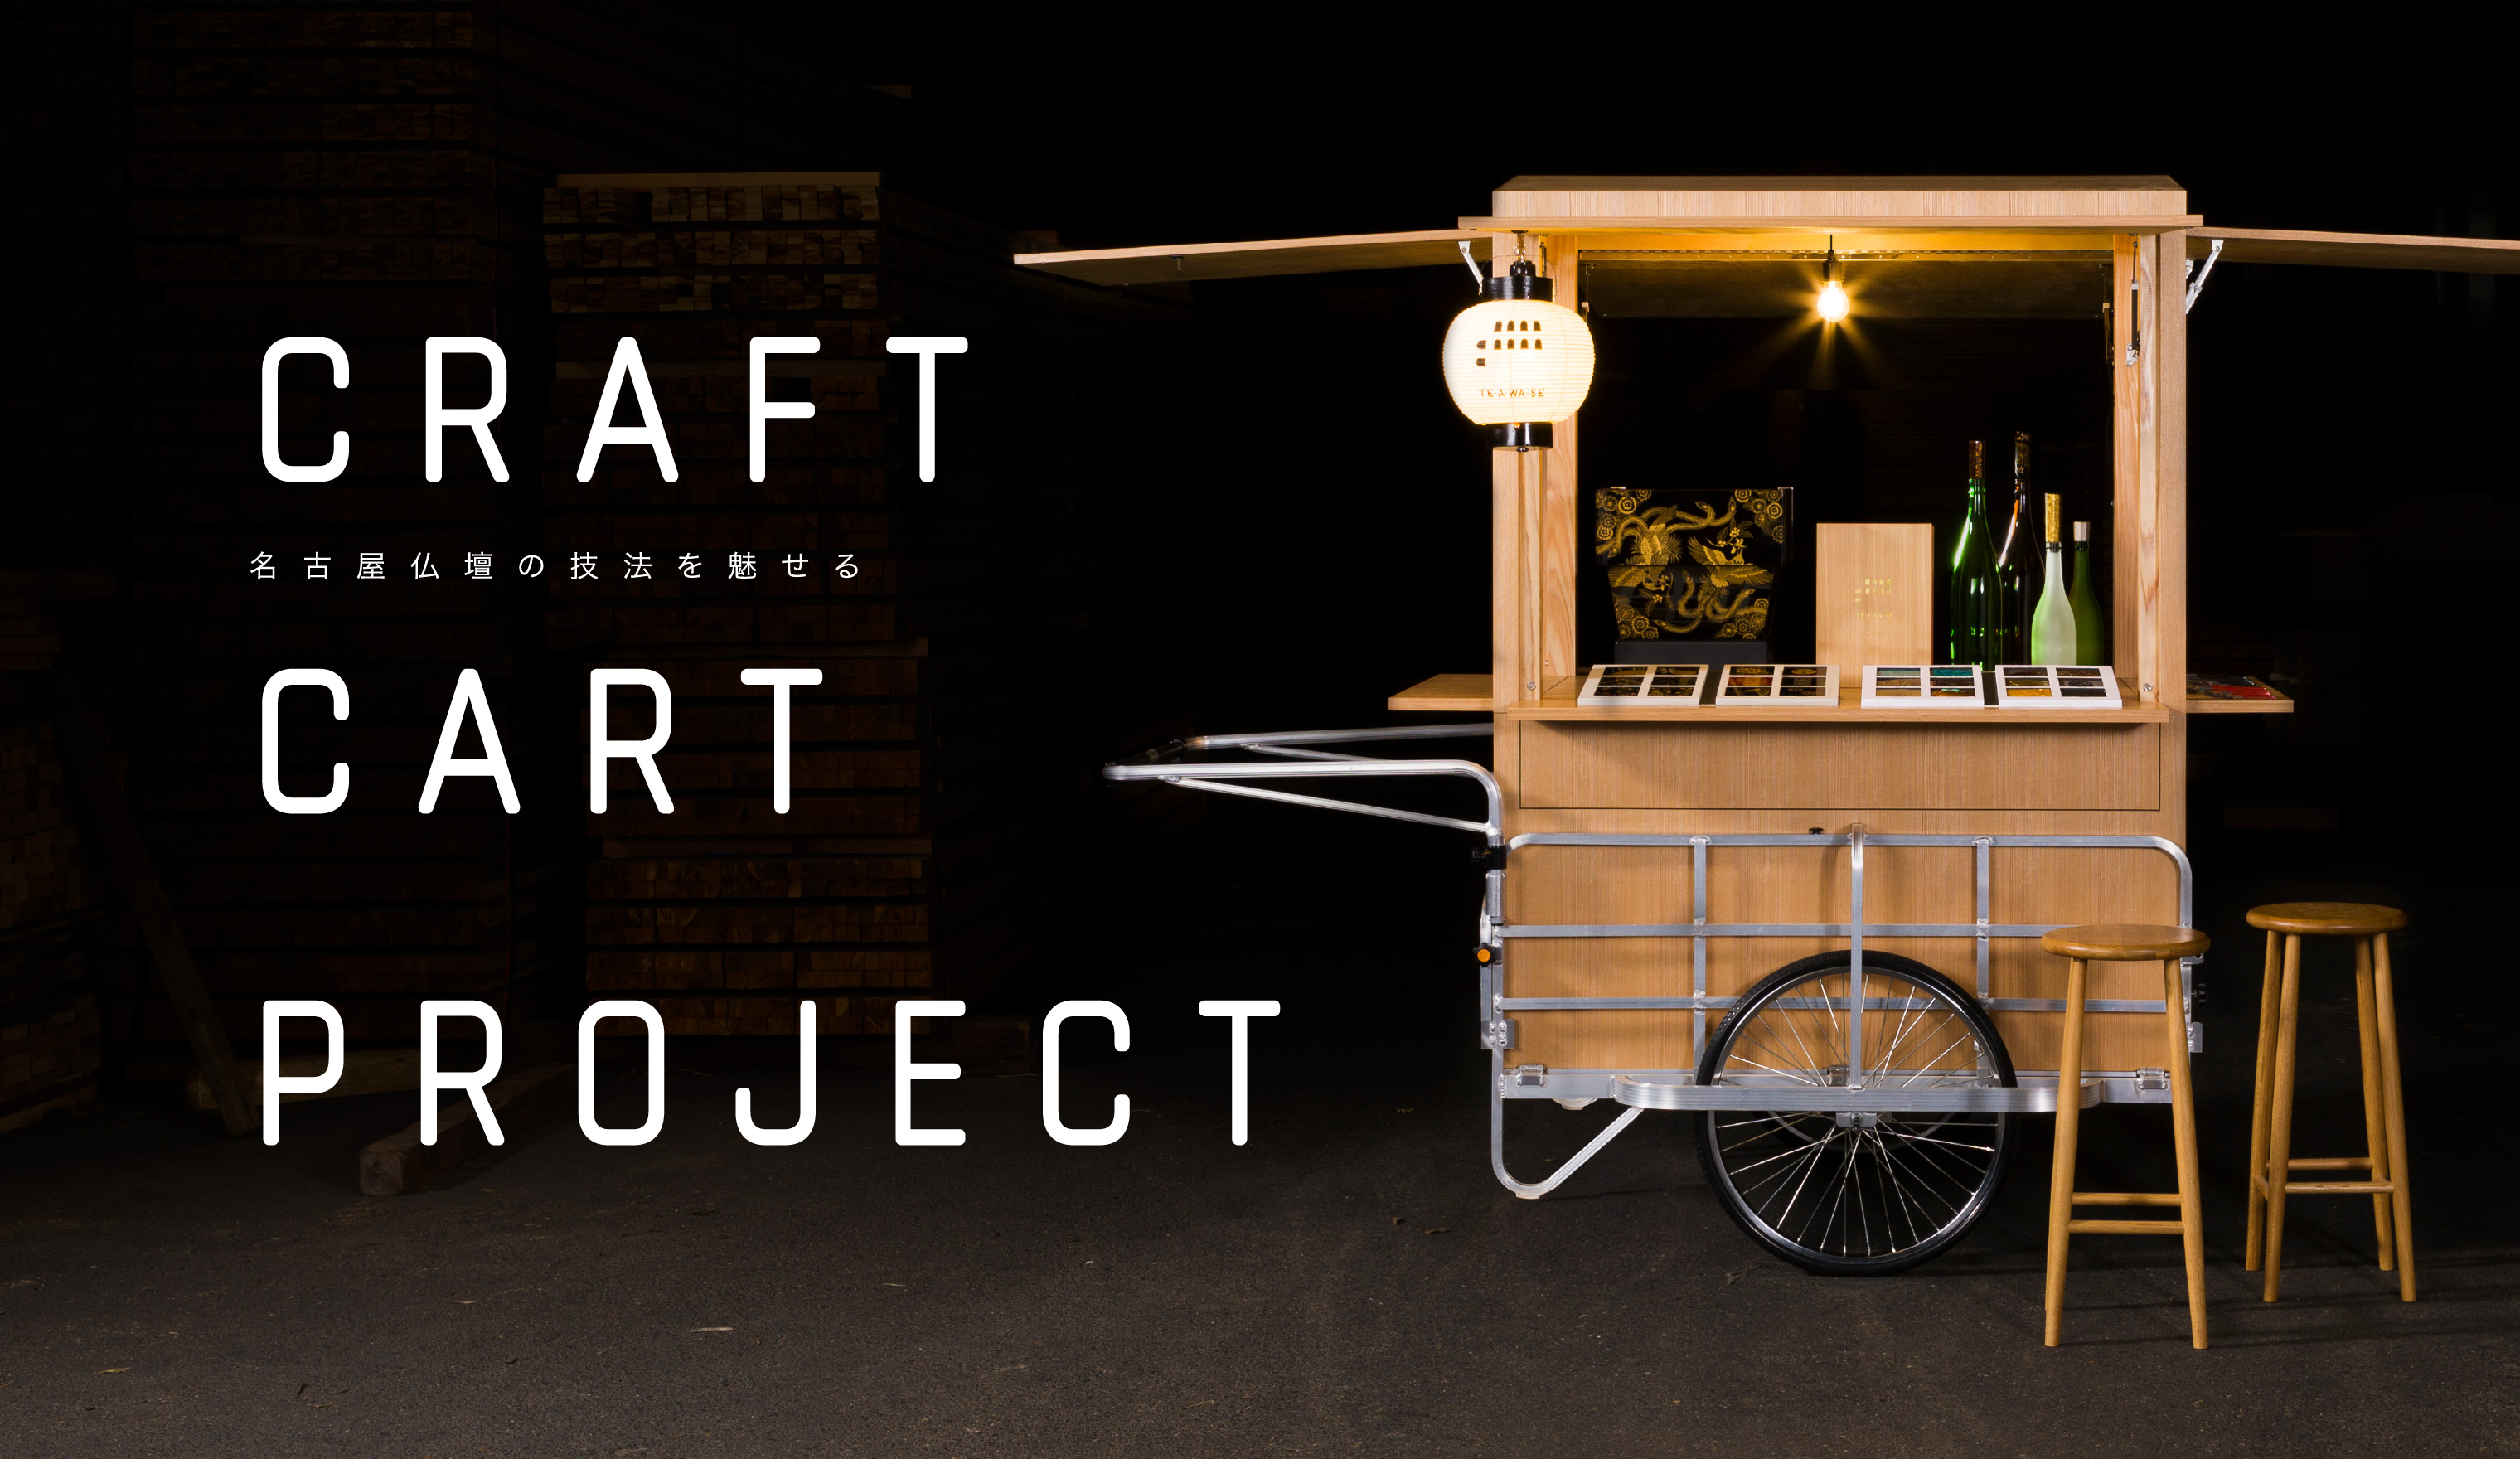 CRAFT CART PROJECT 名古屋仏壇の技法を魅せる